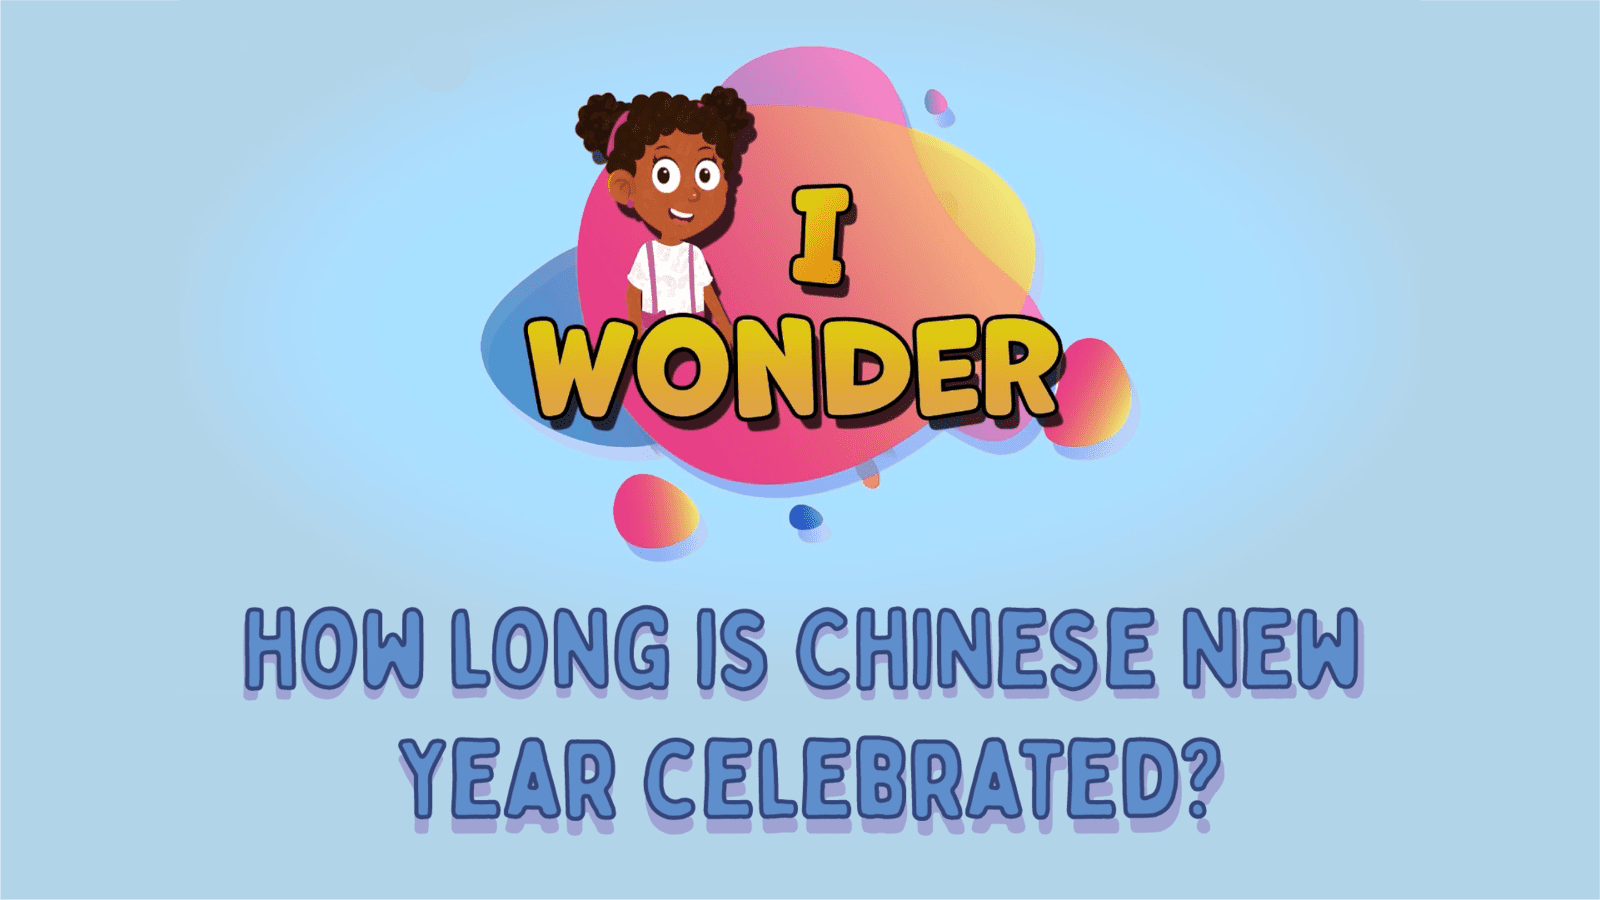 How Long Is Chinese New Year Celebrated?